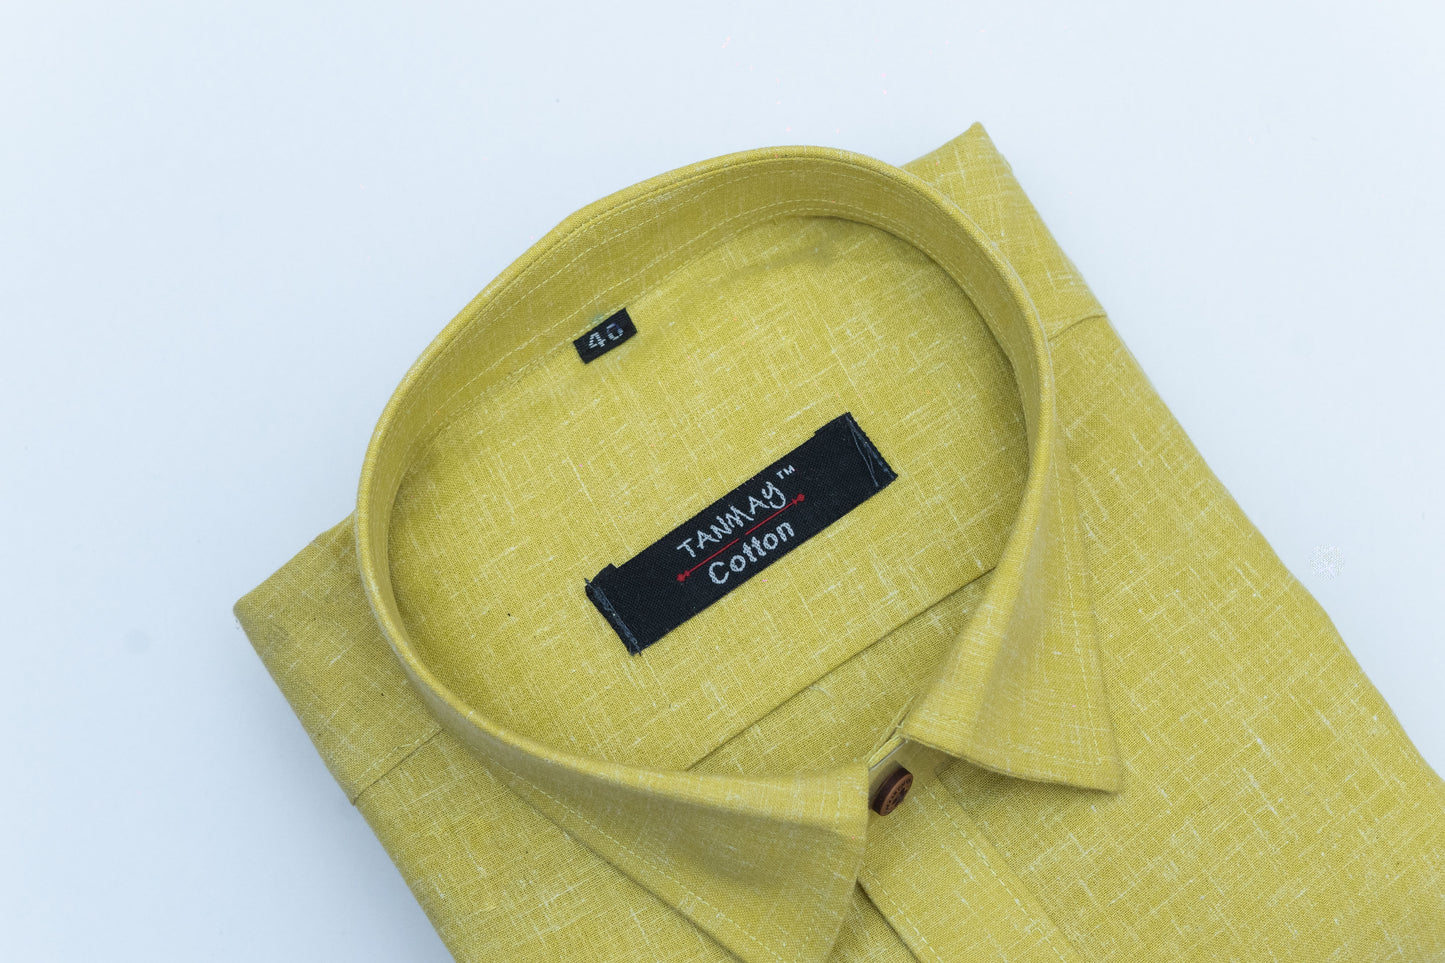 Cotton Tanmay Dark Yellow Color Linen Fill Formal Cotton Shirt For Men's